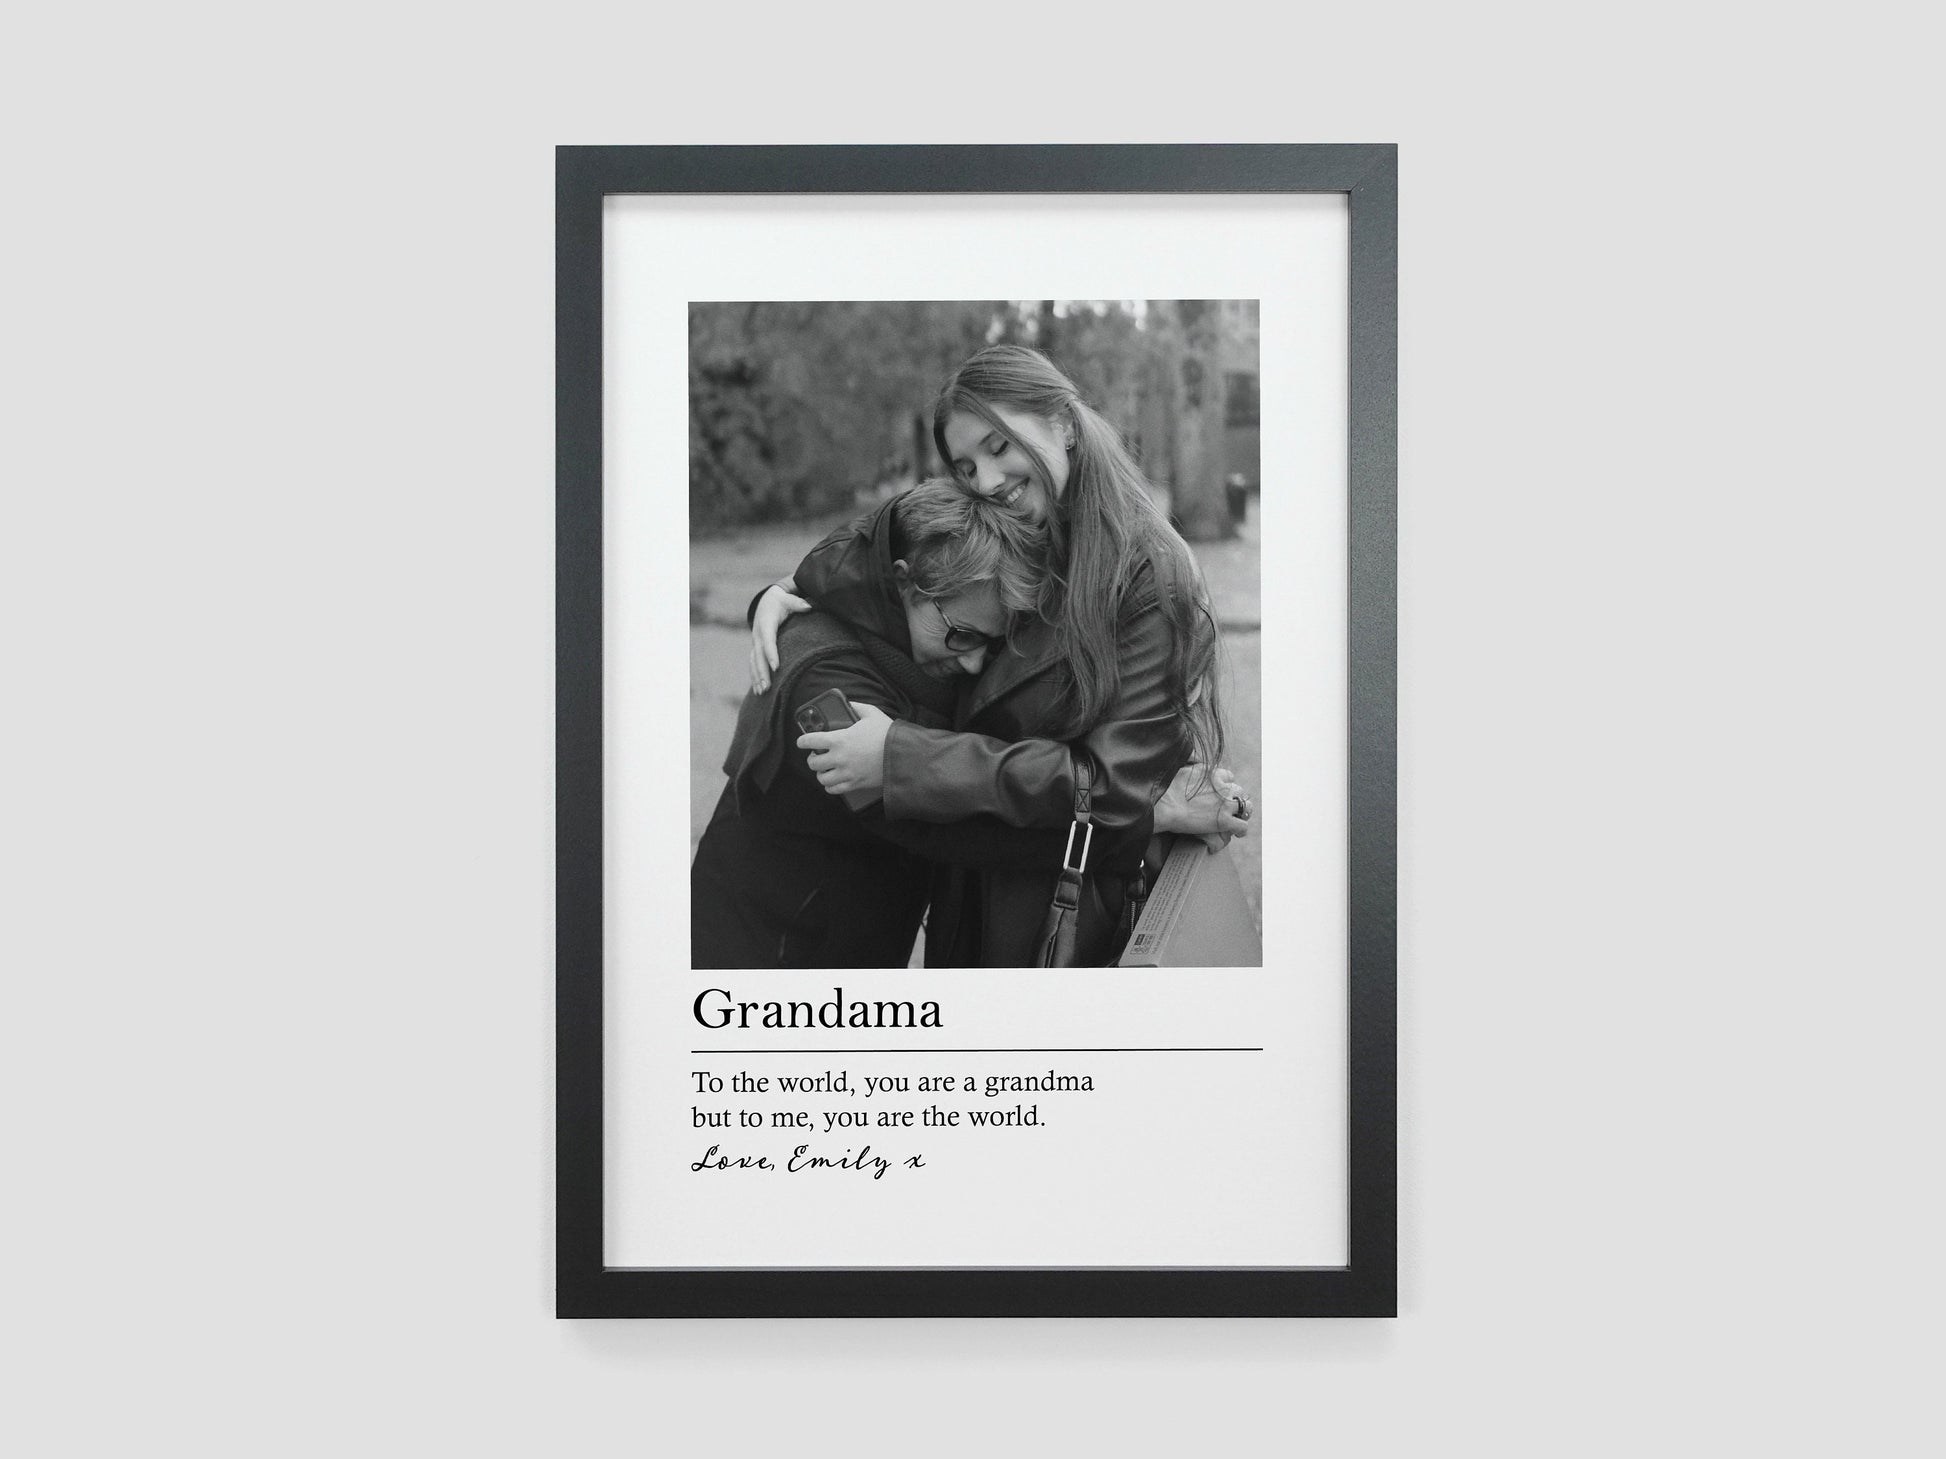 Photo gift for grandparent | Personalised picture gift for grandma grandad | Definition print for nanny or gramps | Birthday present VA065